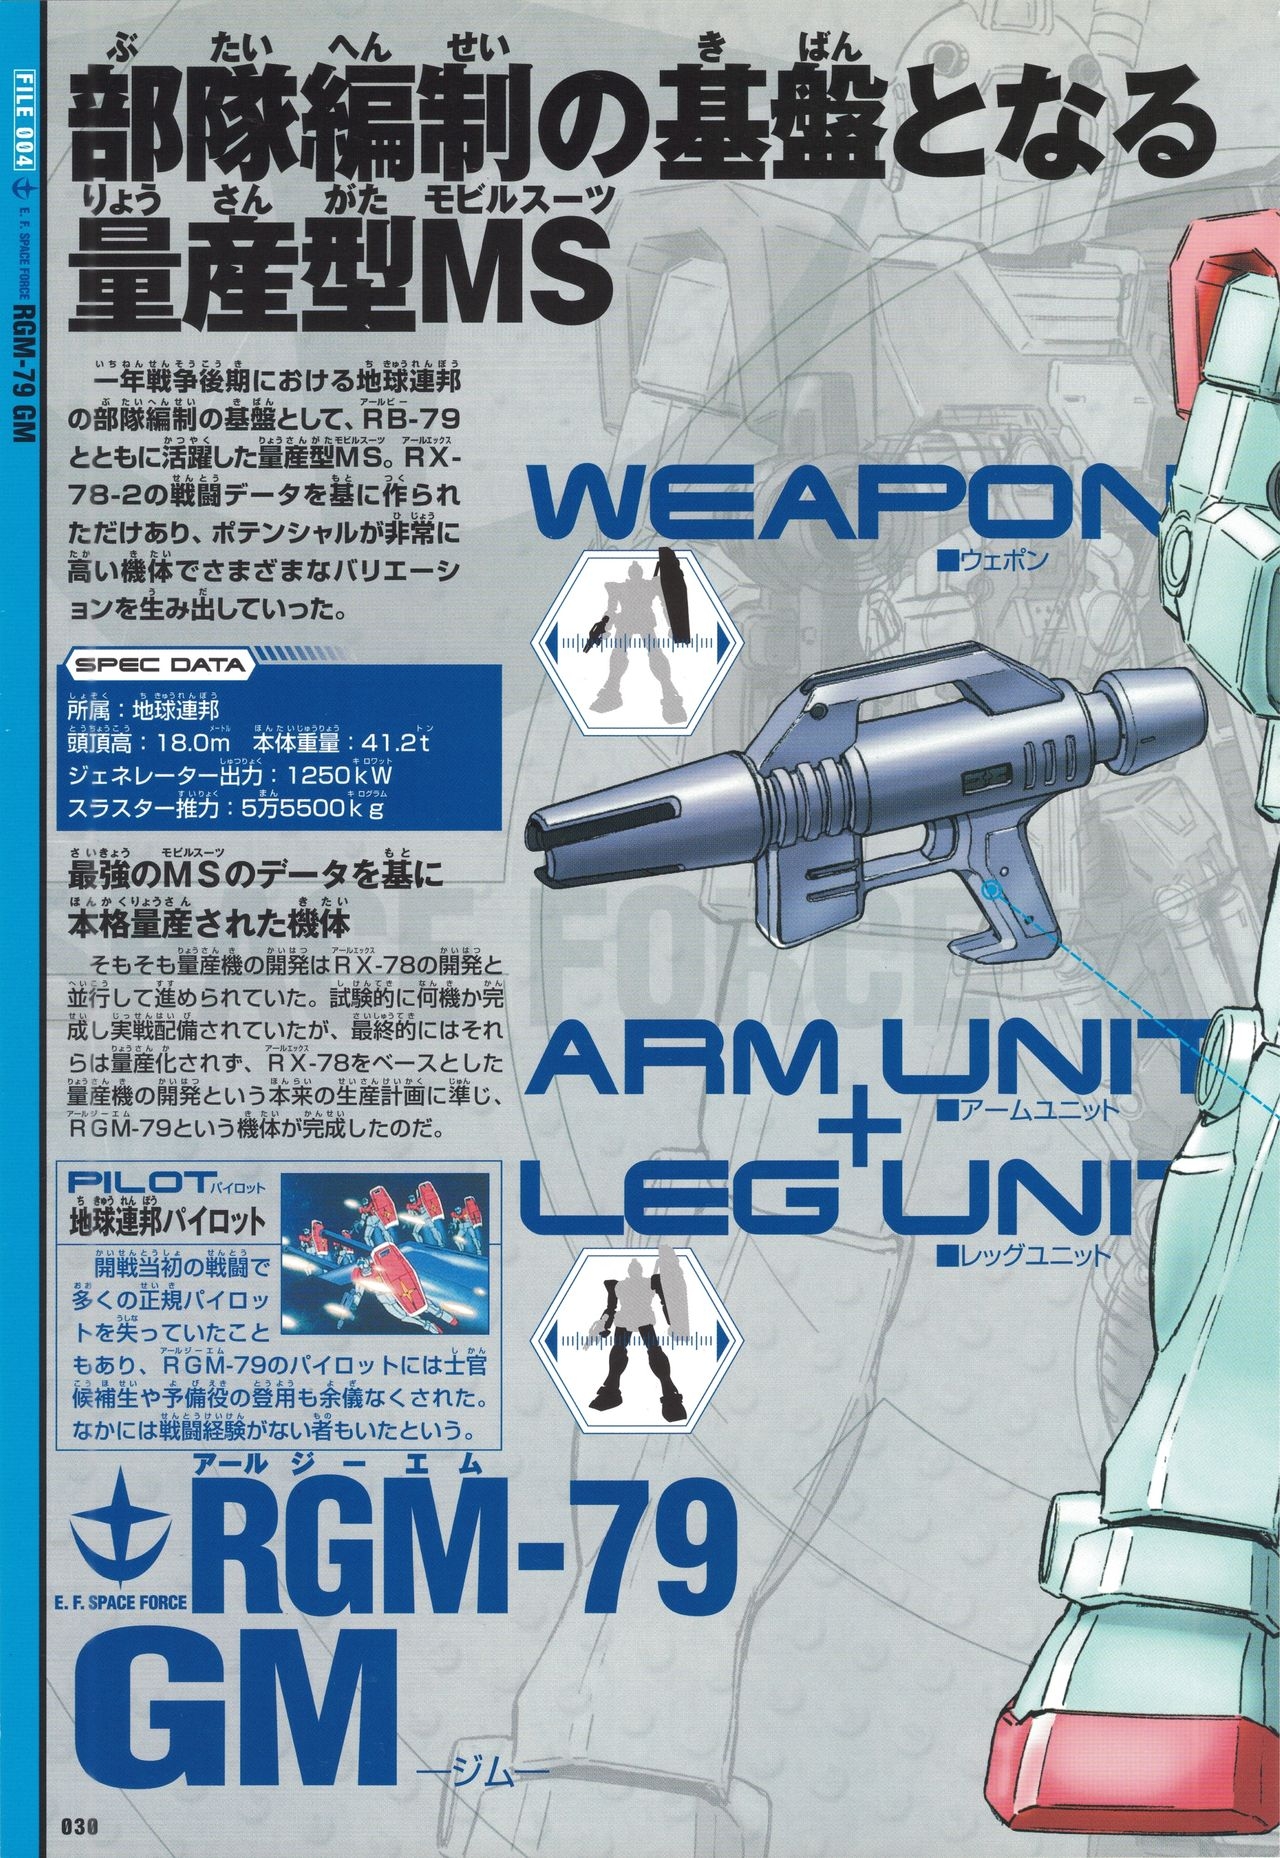 Mobile Suit Gundam - New Cross-Section Book - One Year War Edition 32